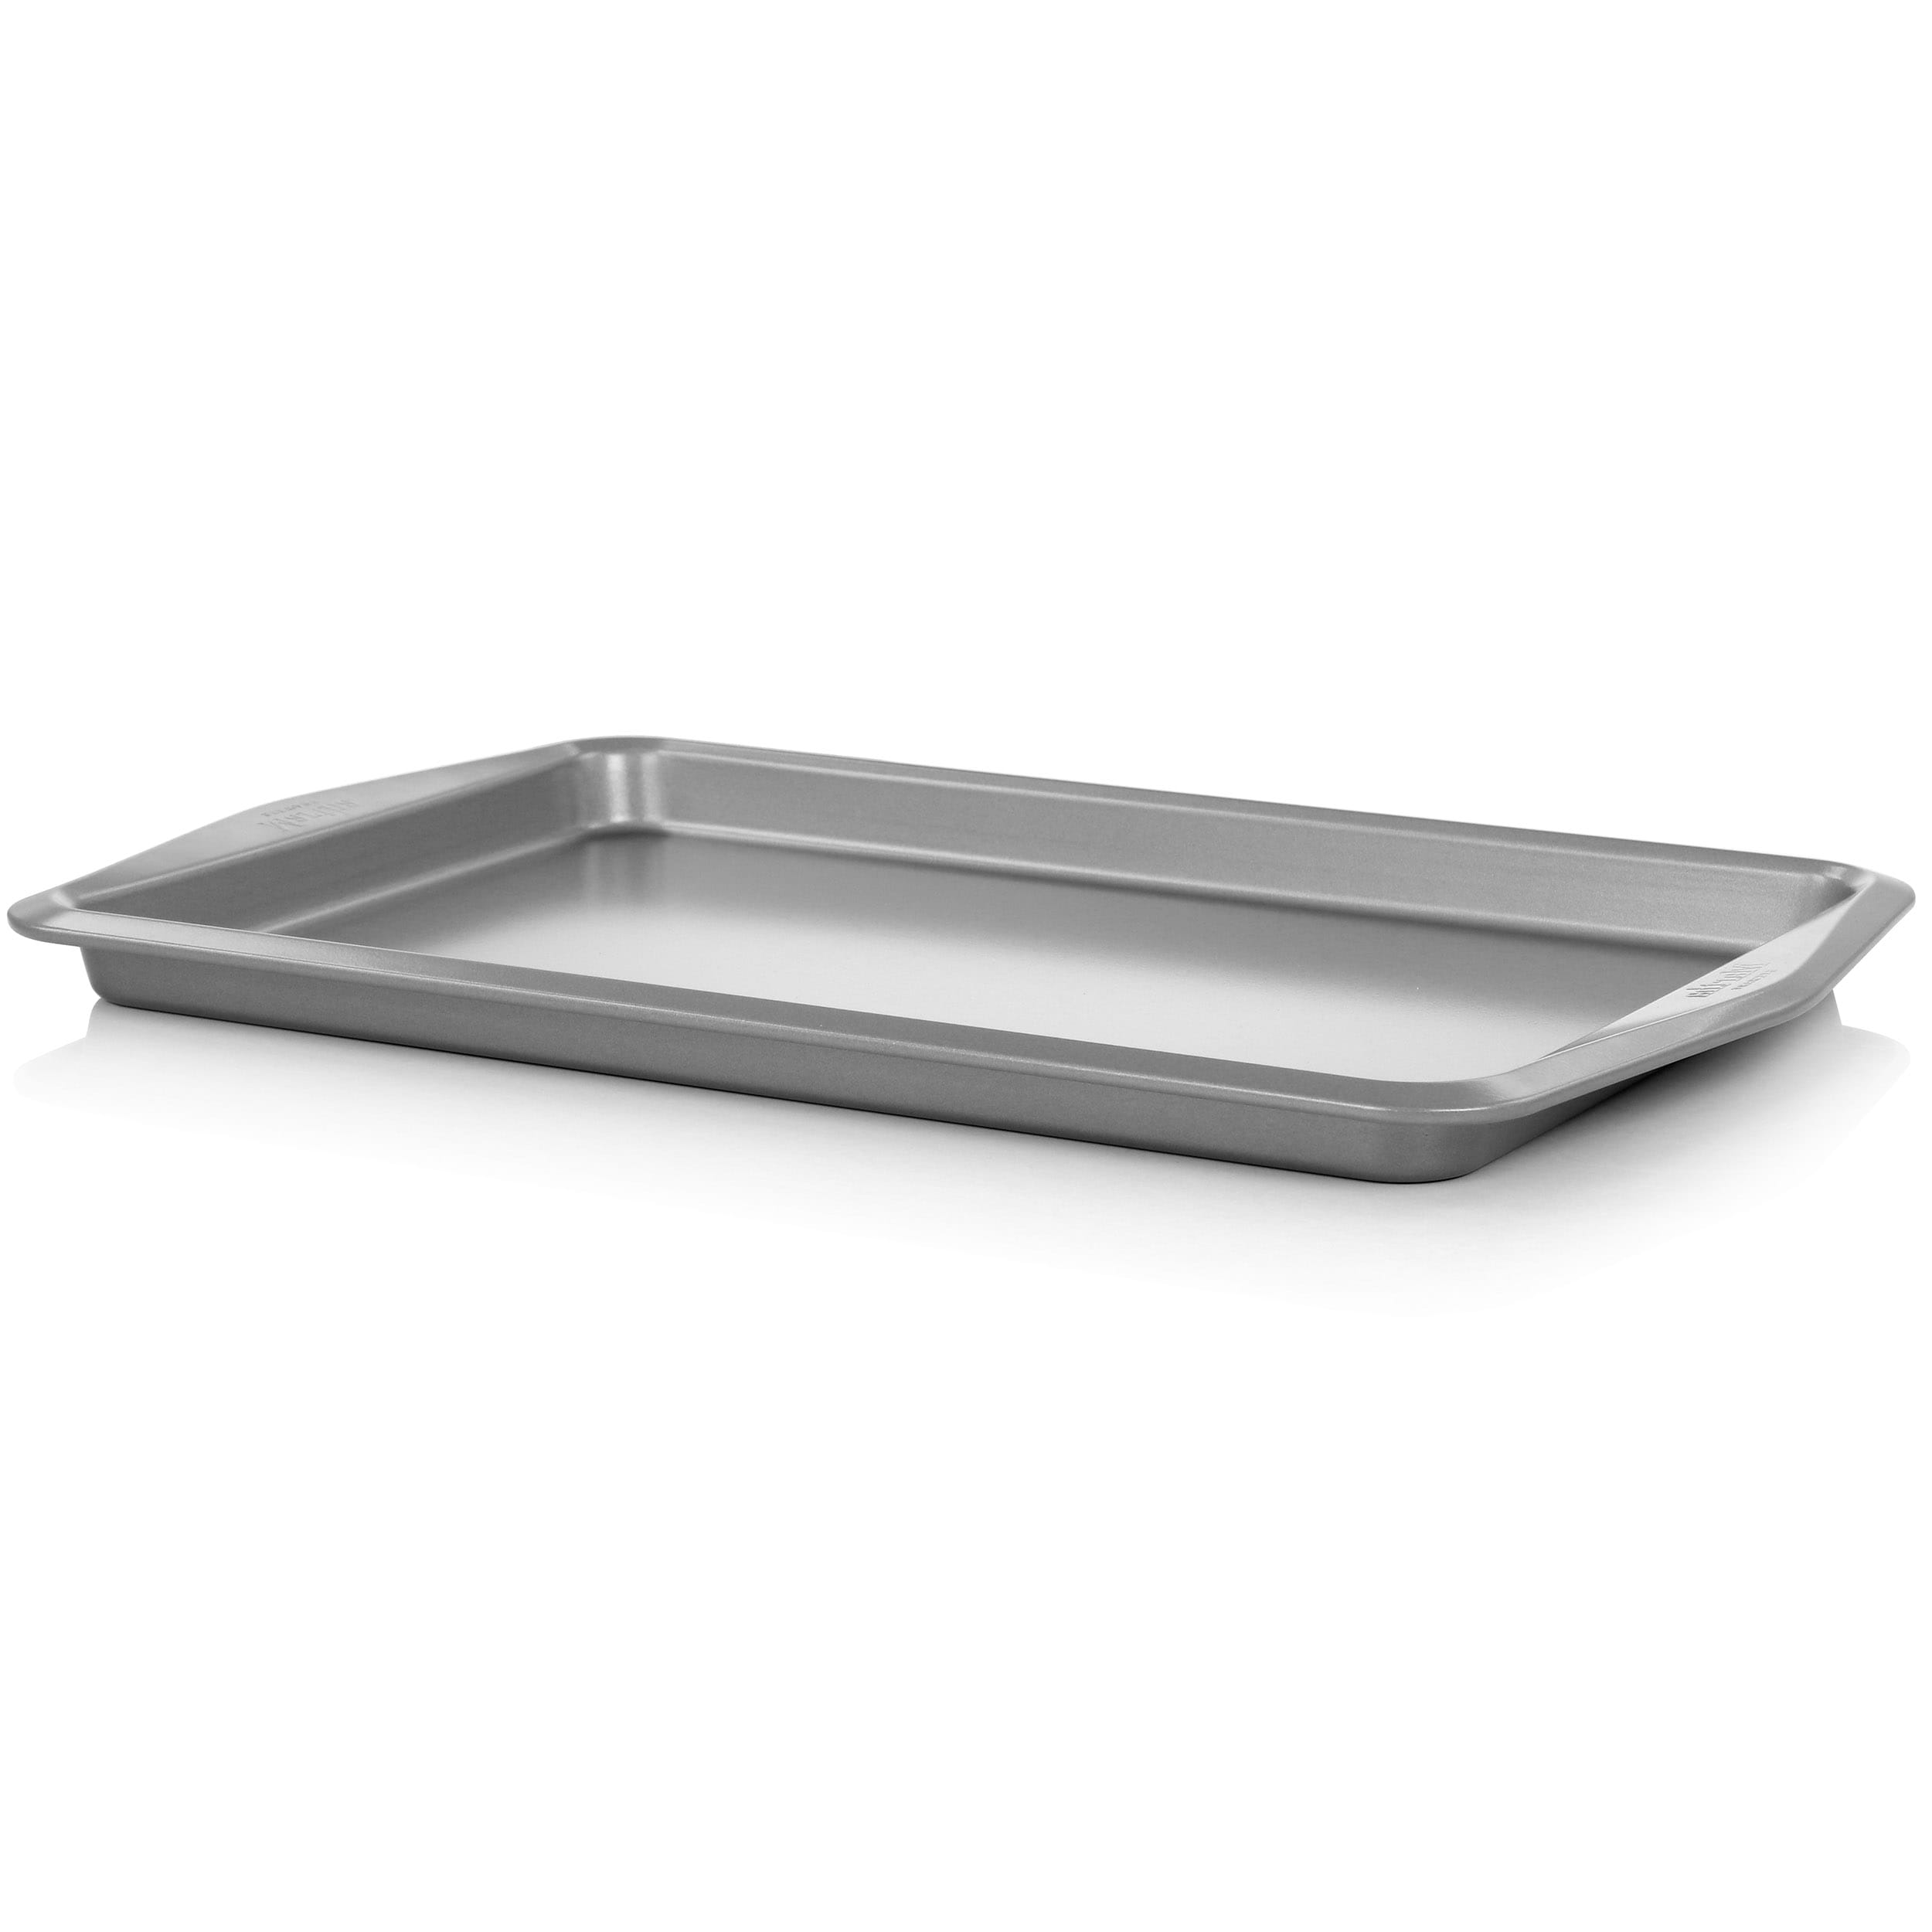 Martha Stewart 15 Non-Stick Cookie Sheet, Color: Gray - JCPenney